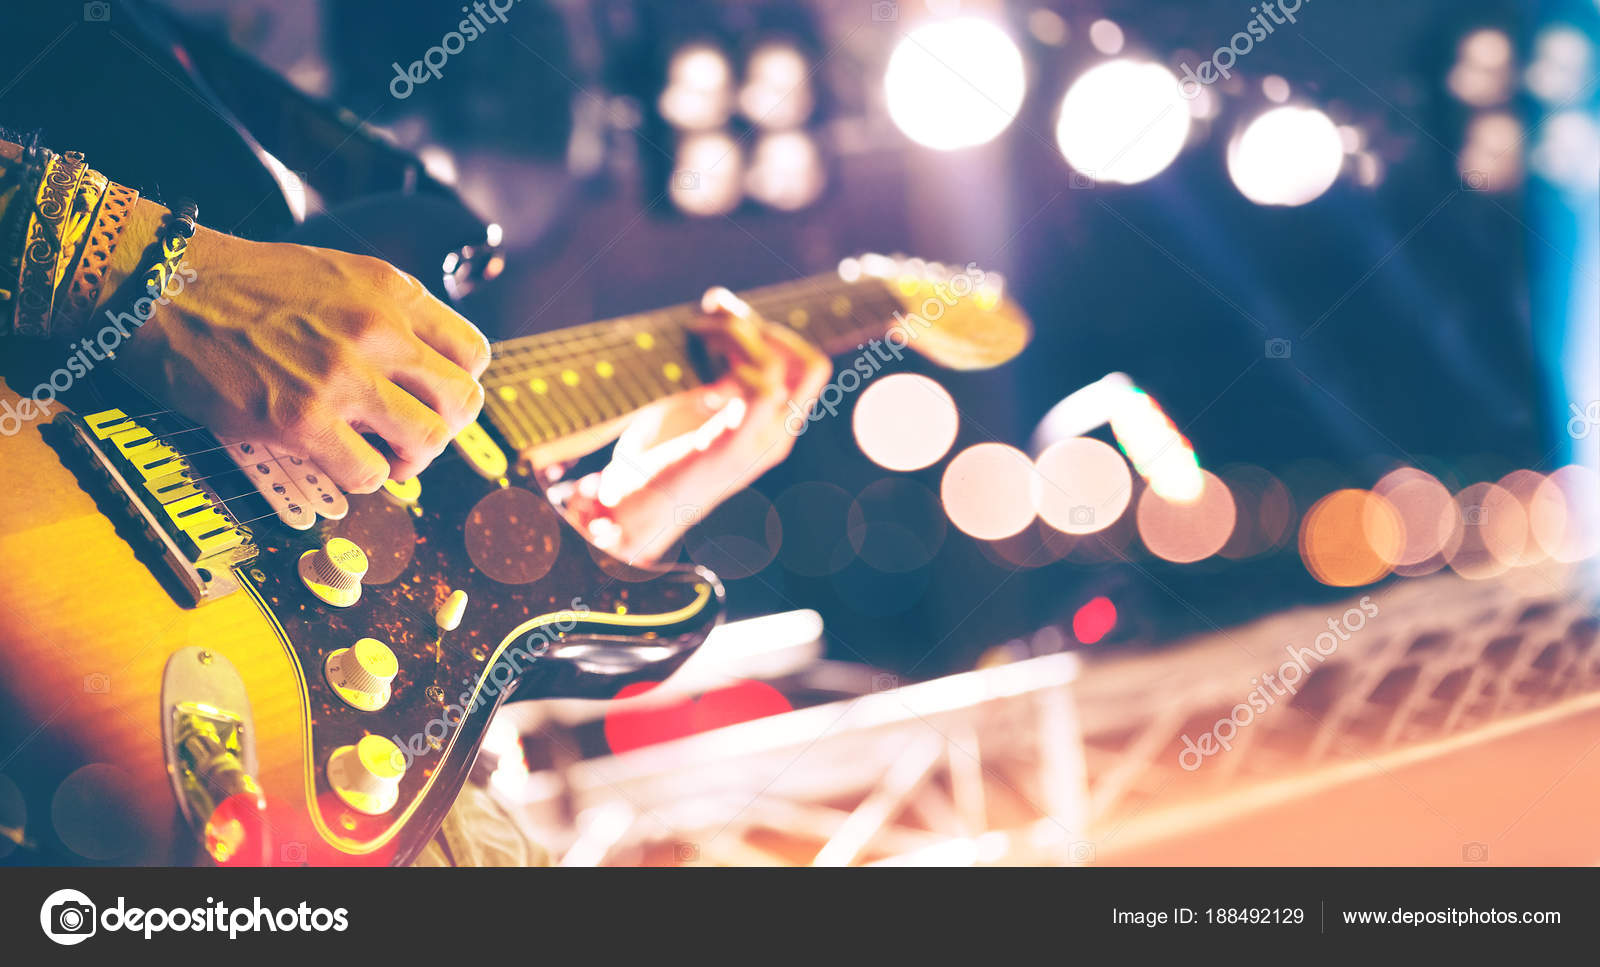 Live music background Stock Photos, Royalty Free Live music background  Images | Depositphotos